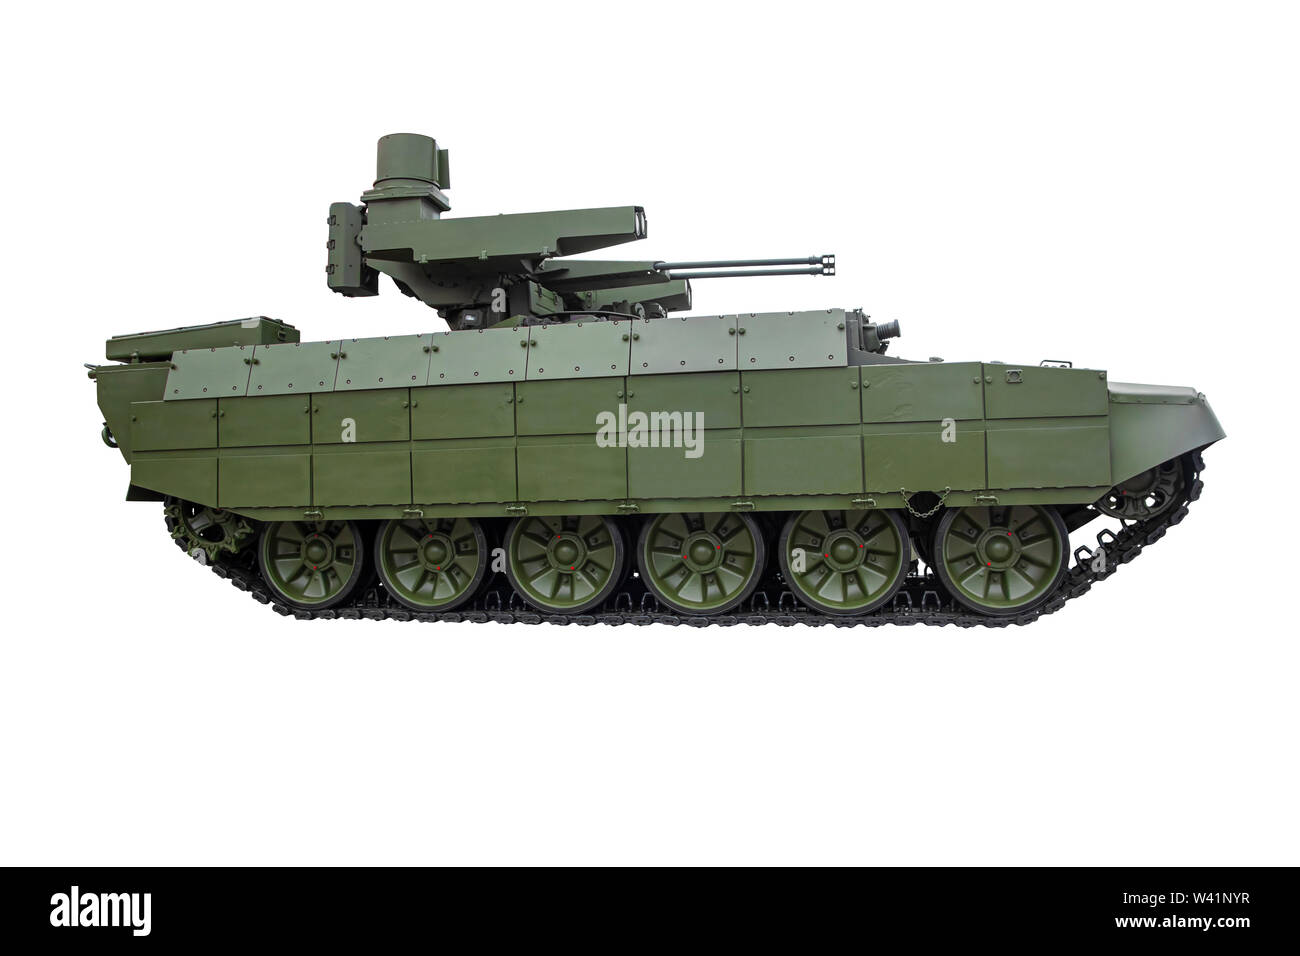 Modern infantry fighting vehicle of the Russian army on a white background. Stock Photo